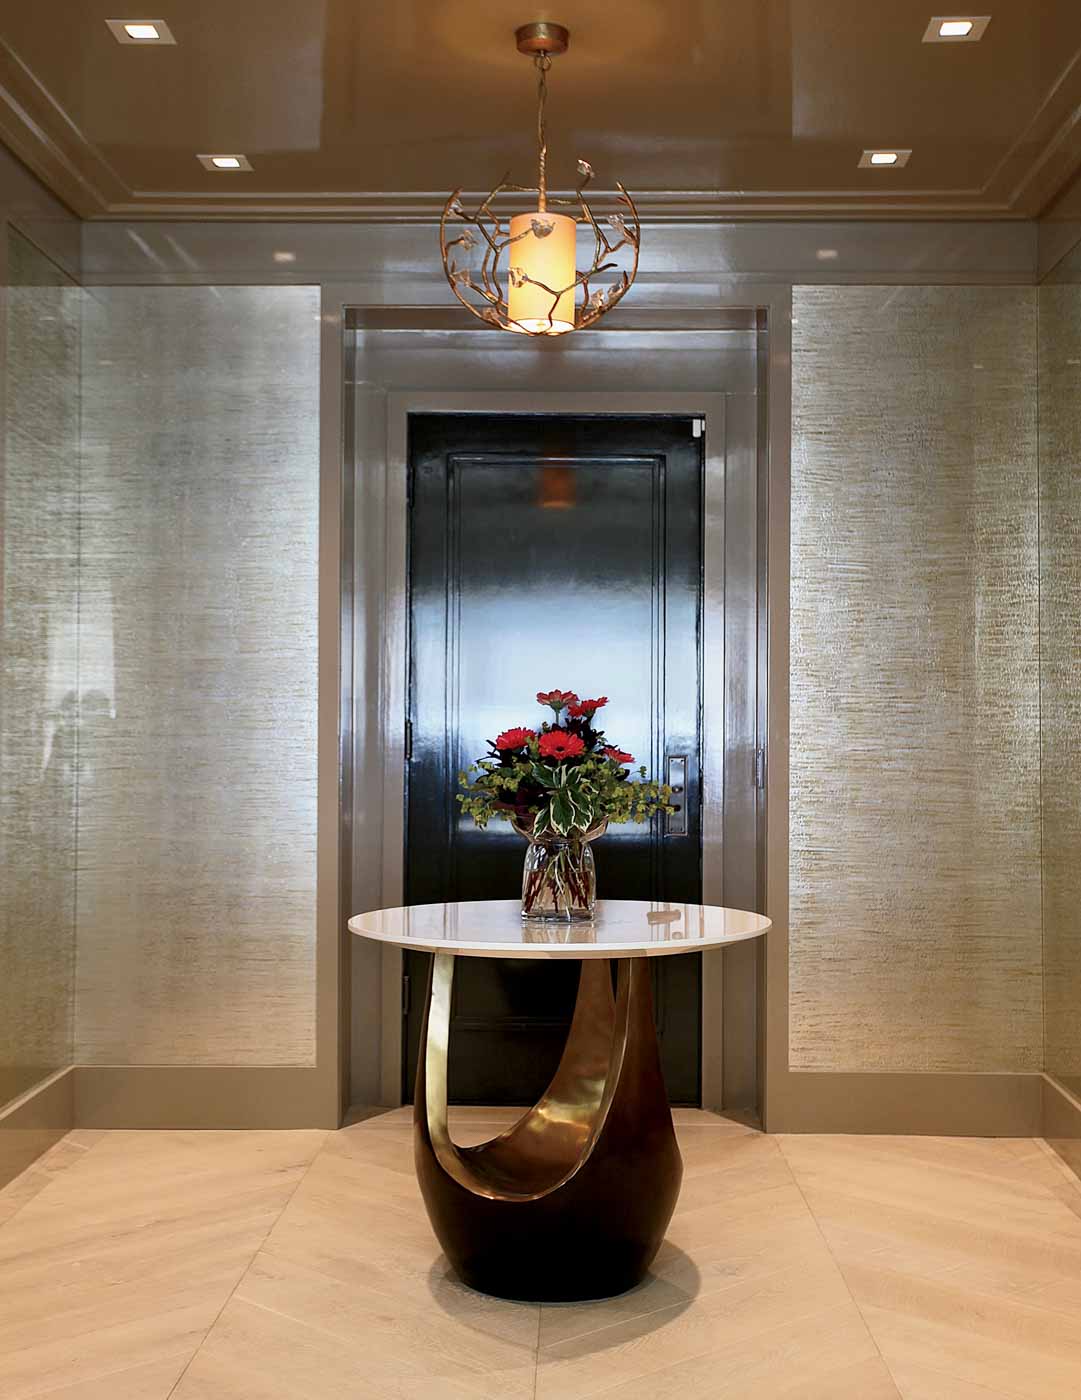 50 Sr2023 05 149 9. Entry Foyer, Eight Silver Shagreen Elomise Panels On Walls 